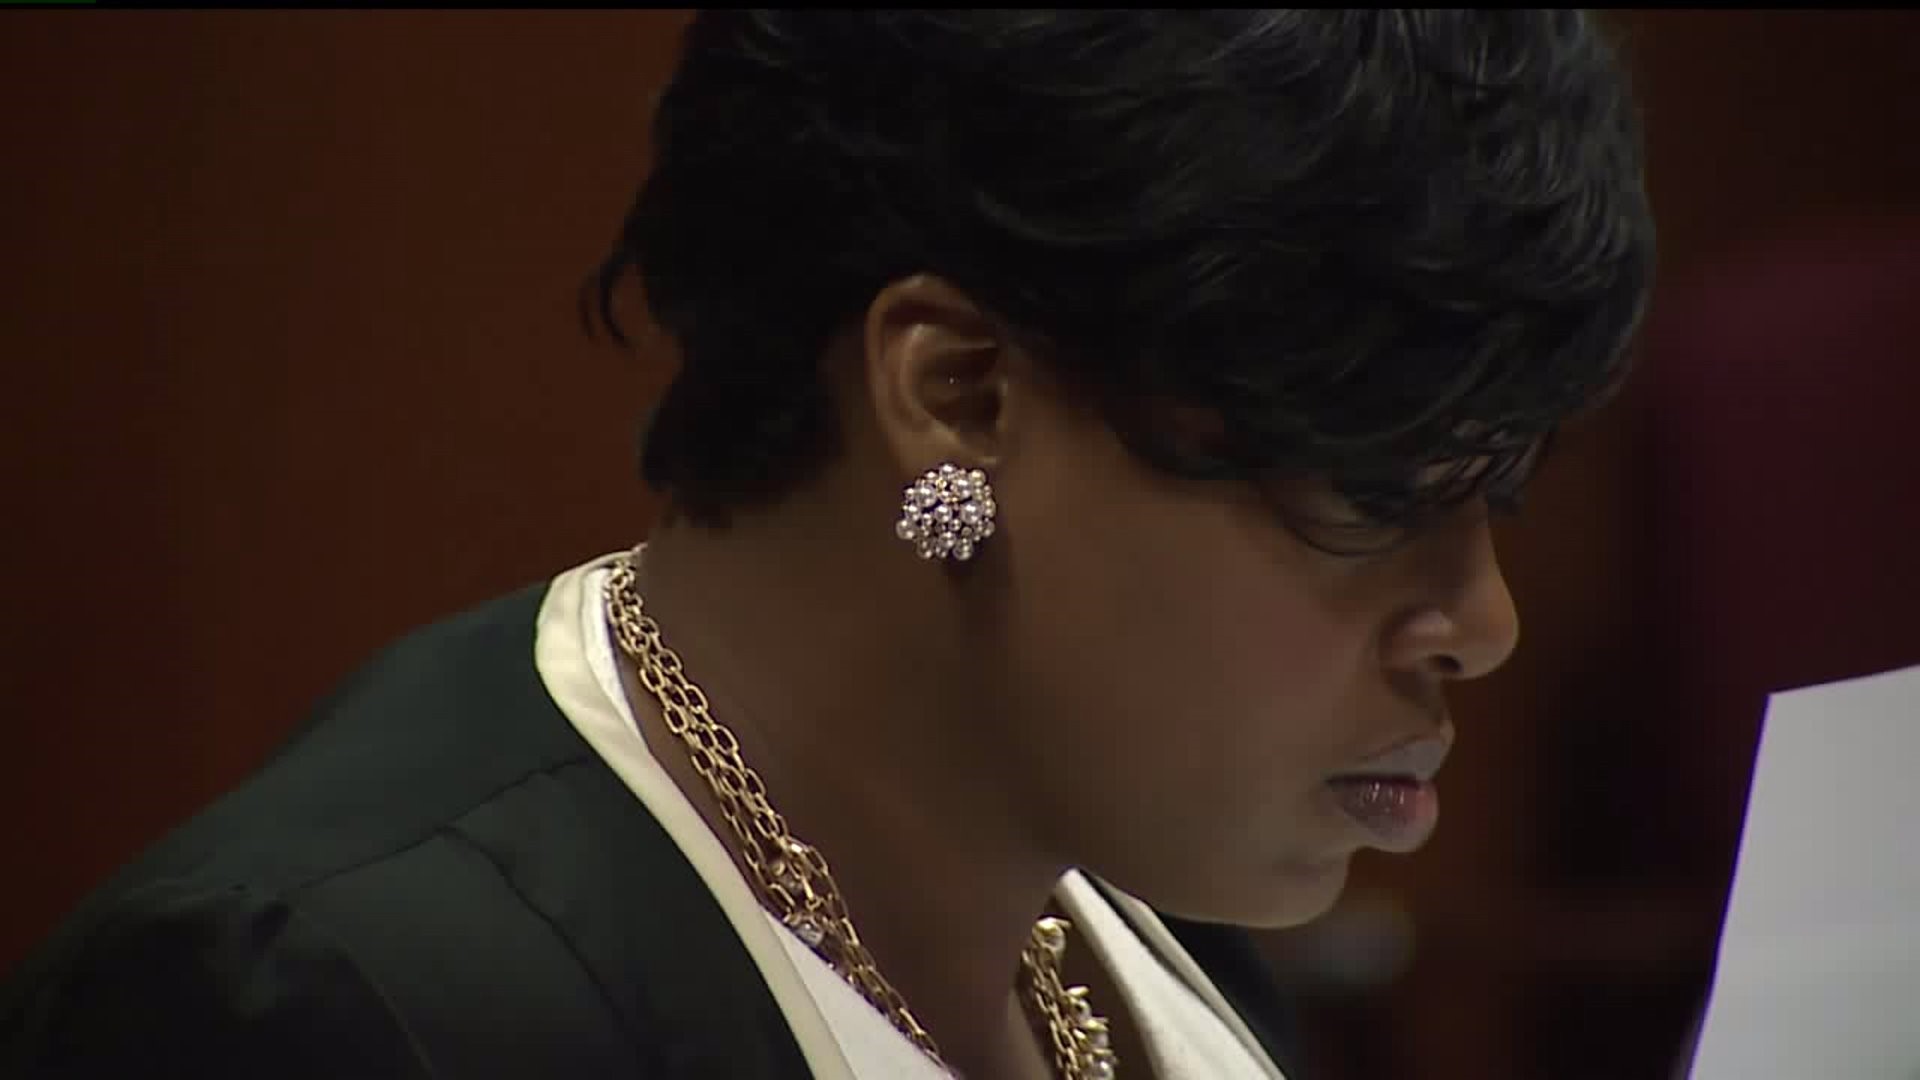 Latrice Lacey Trial opening testaments and witnesses